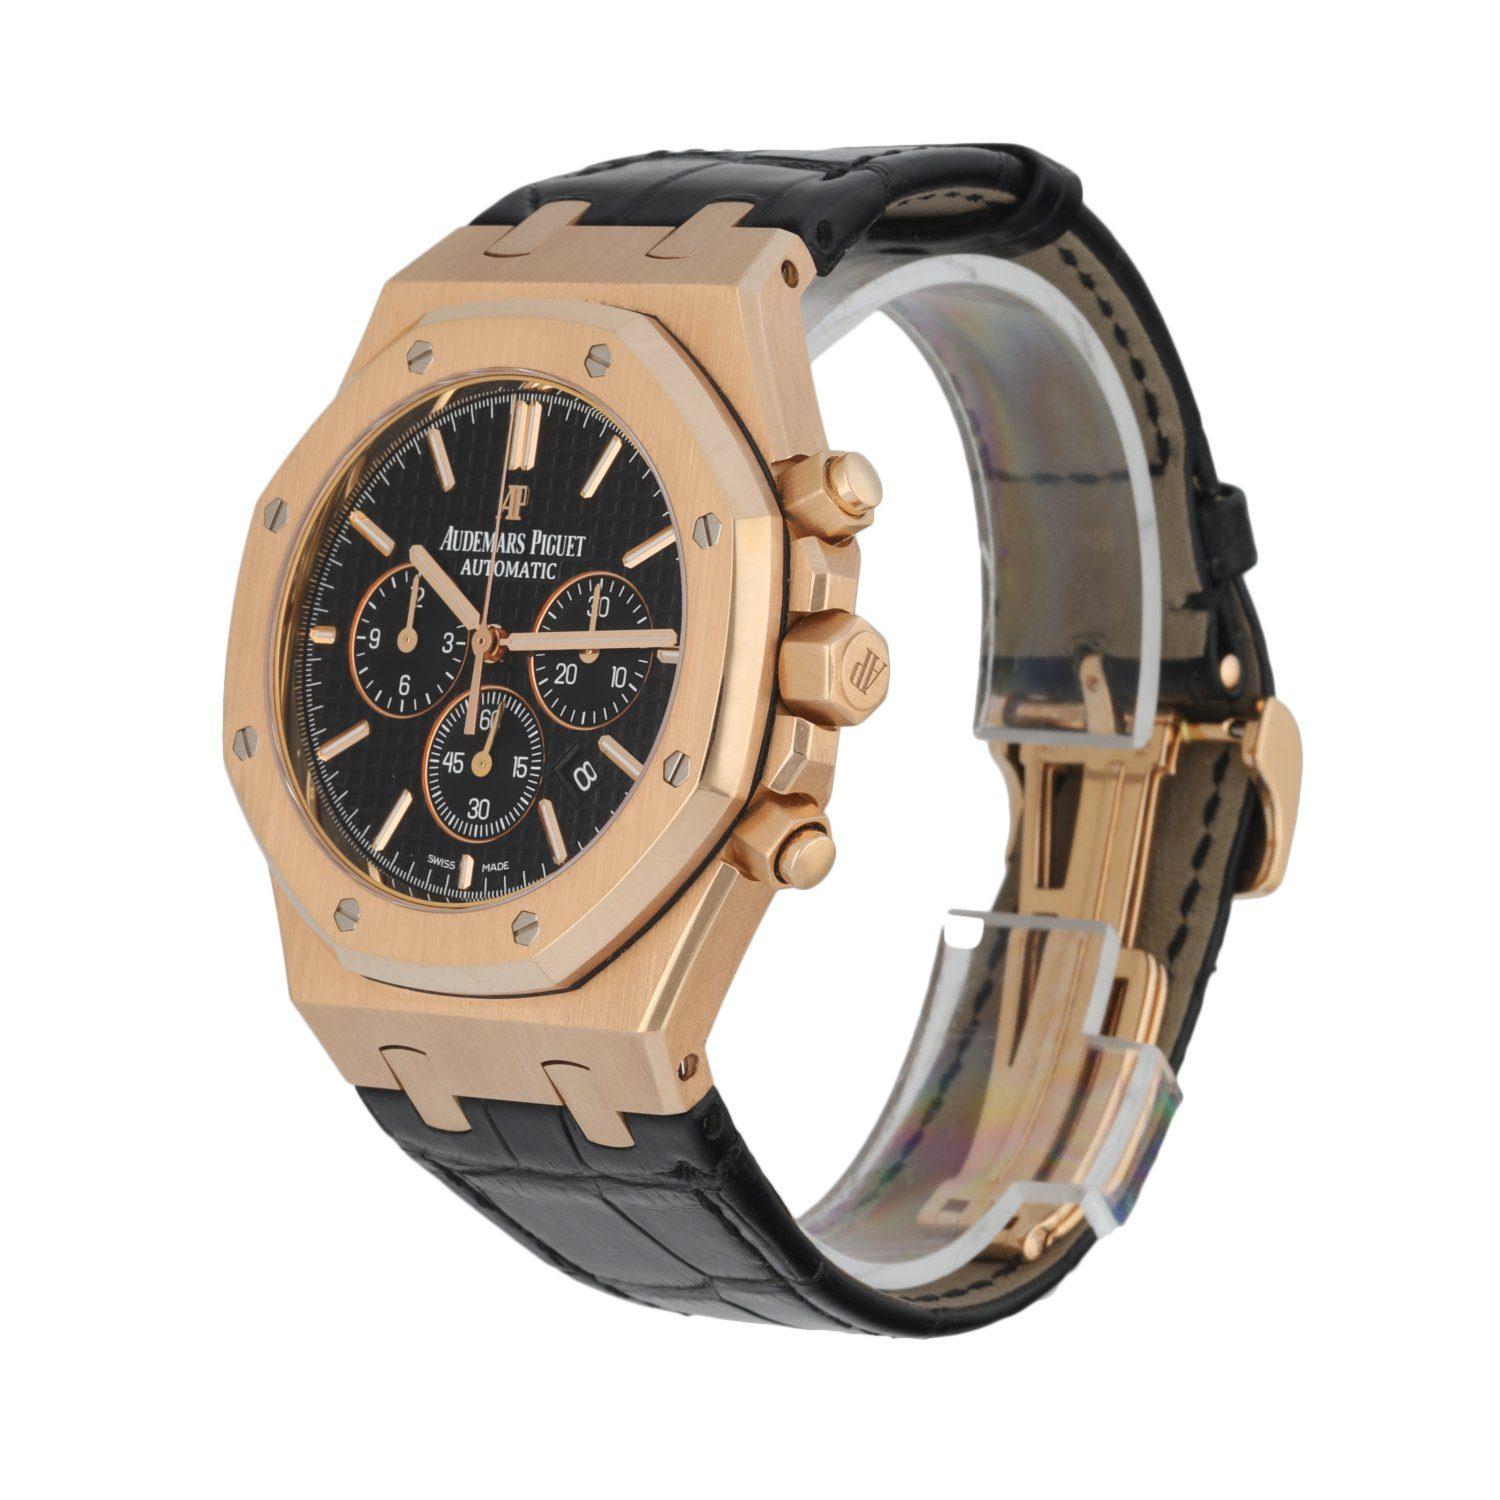 Audemars Piguet Royal Oak 26320OR men's watch. 41MM 18K Rose Gold case with 18K rose gold bezel. Black tapestry dial with luminous rose gold hands and index hour marker.Â Rose gold-rimmed black subdials with a very fine concentric circular engraved